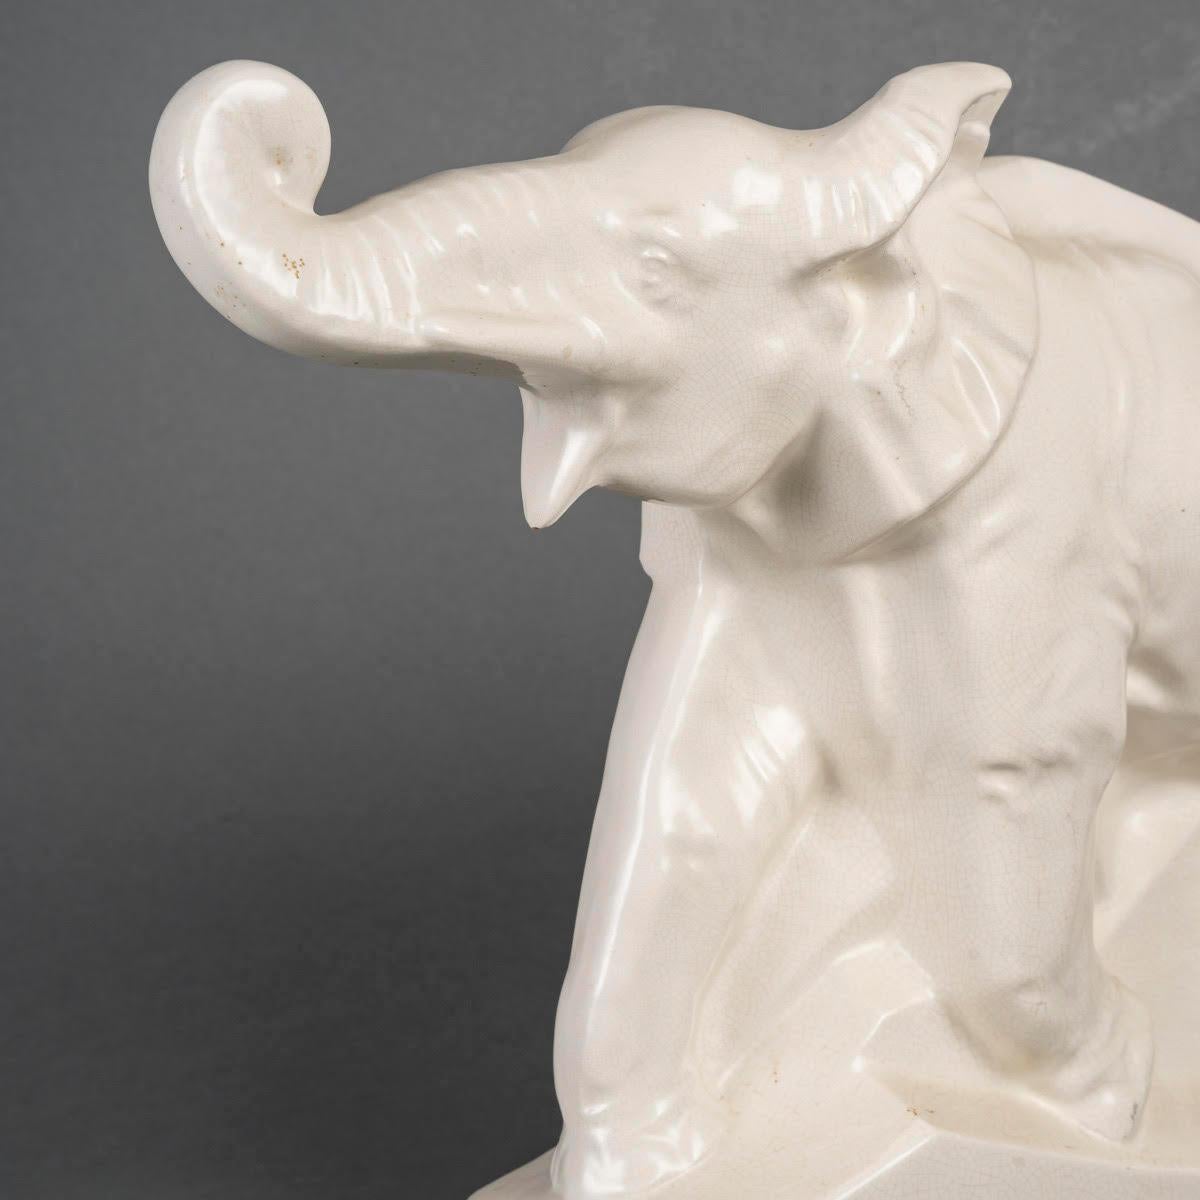 Cracked earthenware sculpture, signed LEJAN, the elephant Dolly, circa 1930.

An Art Deco period cracked earthenware sculpture, 1930, signed LEJAN, depicting an elephant Dolly.
H: 30cm, W: 37cm, D: 13cm